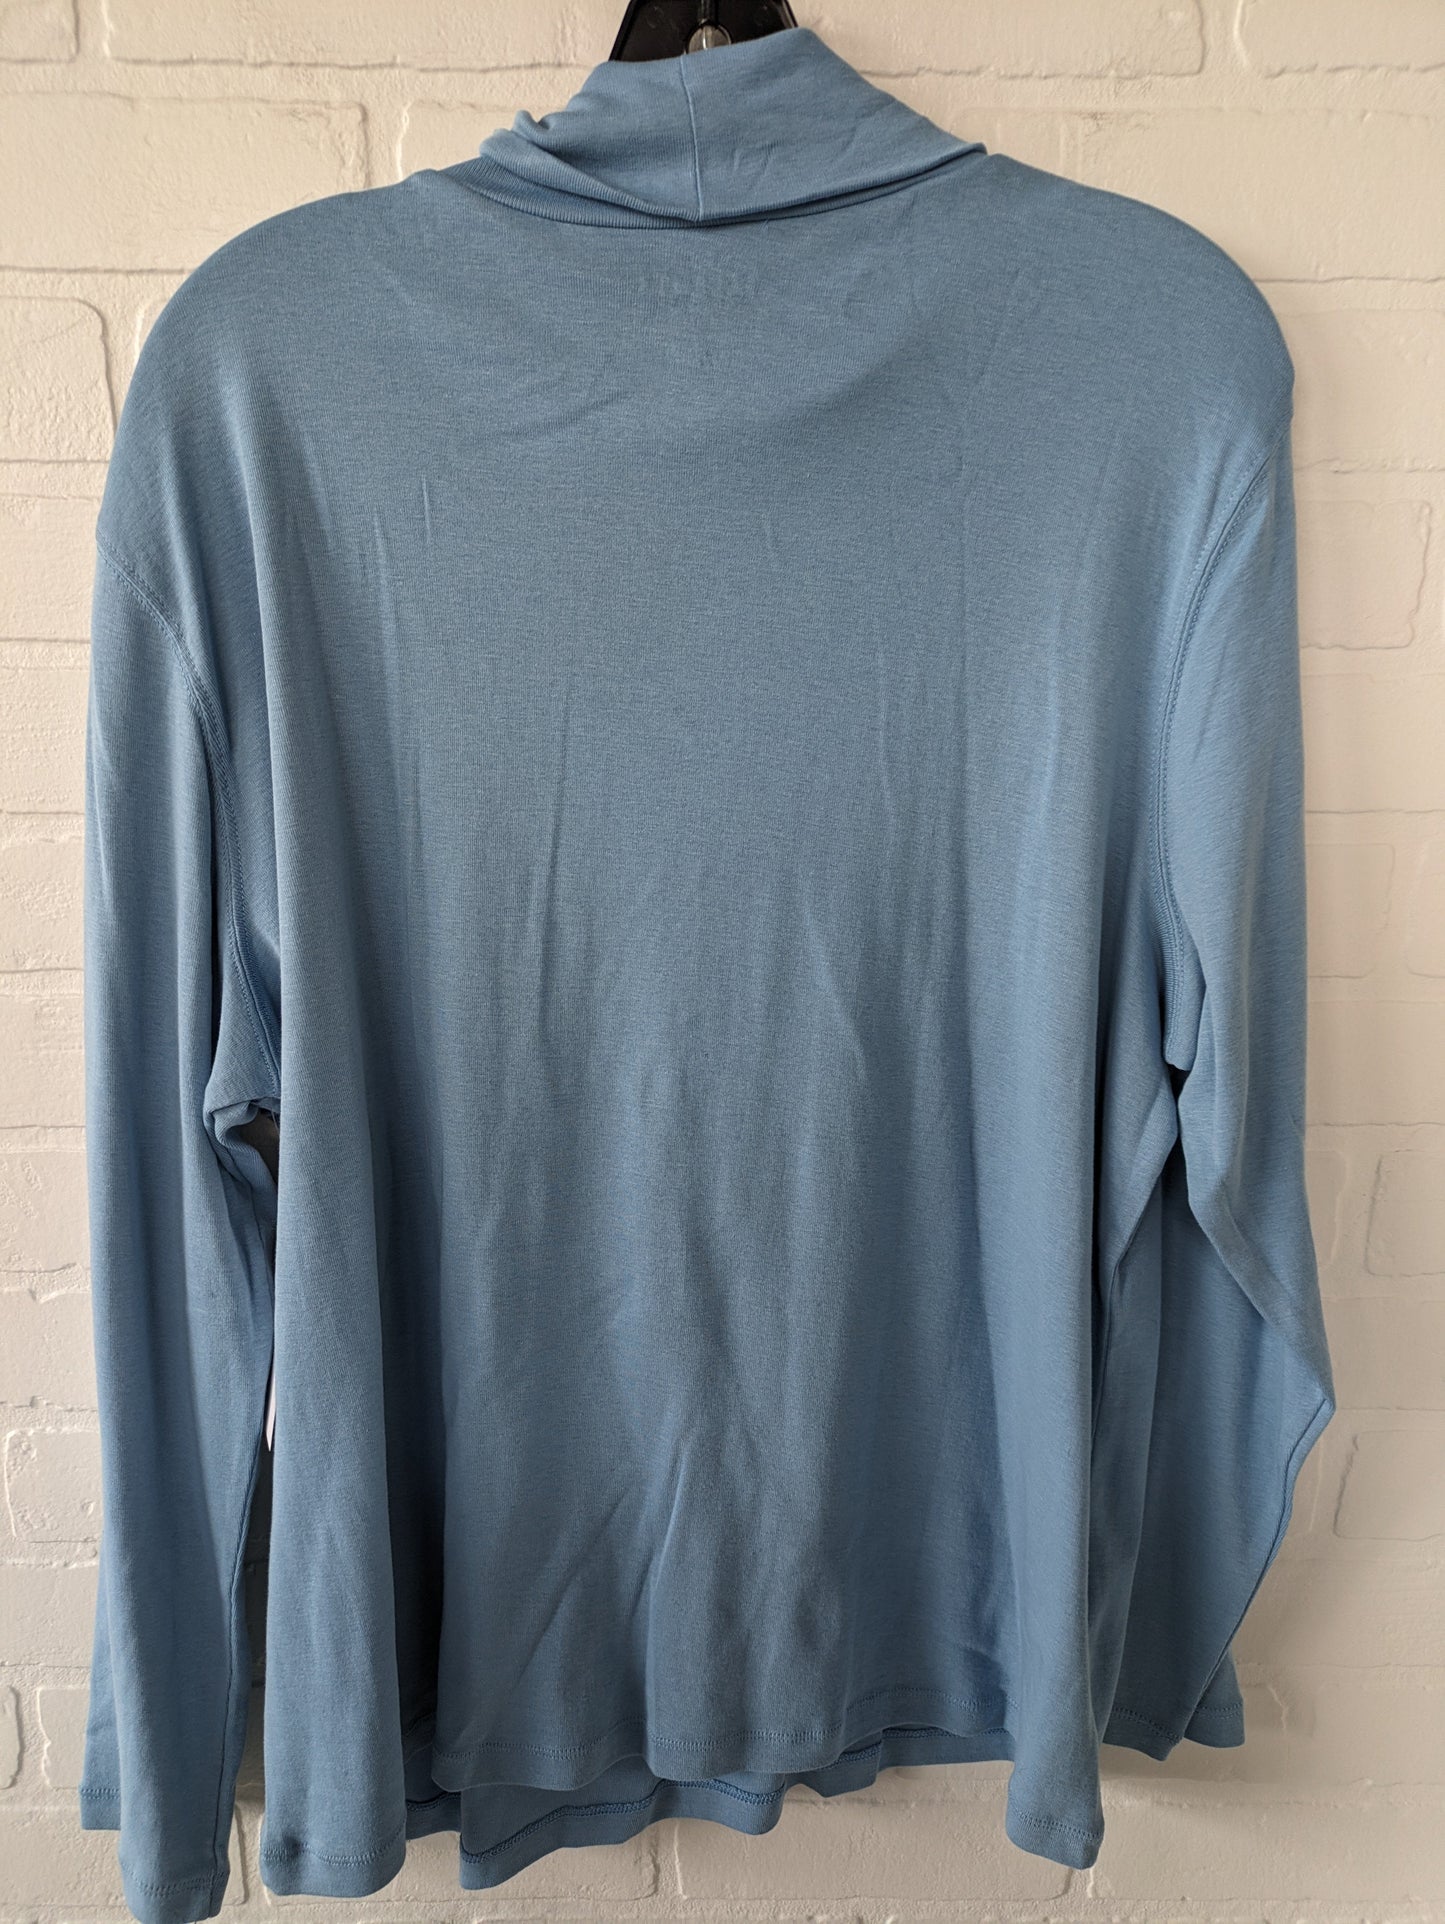 Top Long Sleeve Basic By Talbots  Size: 2x